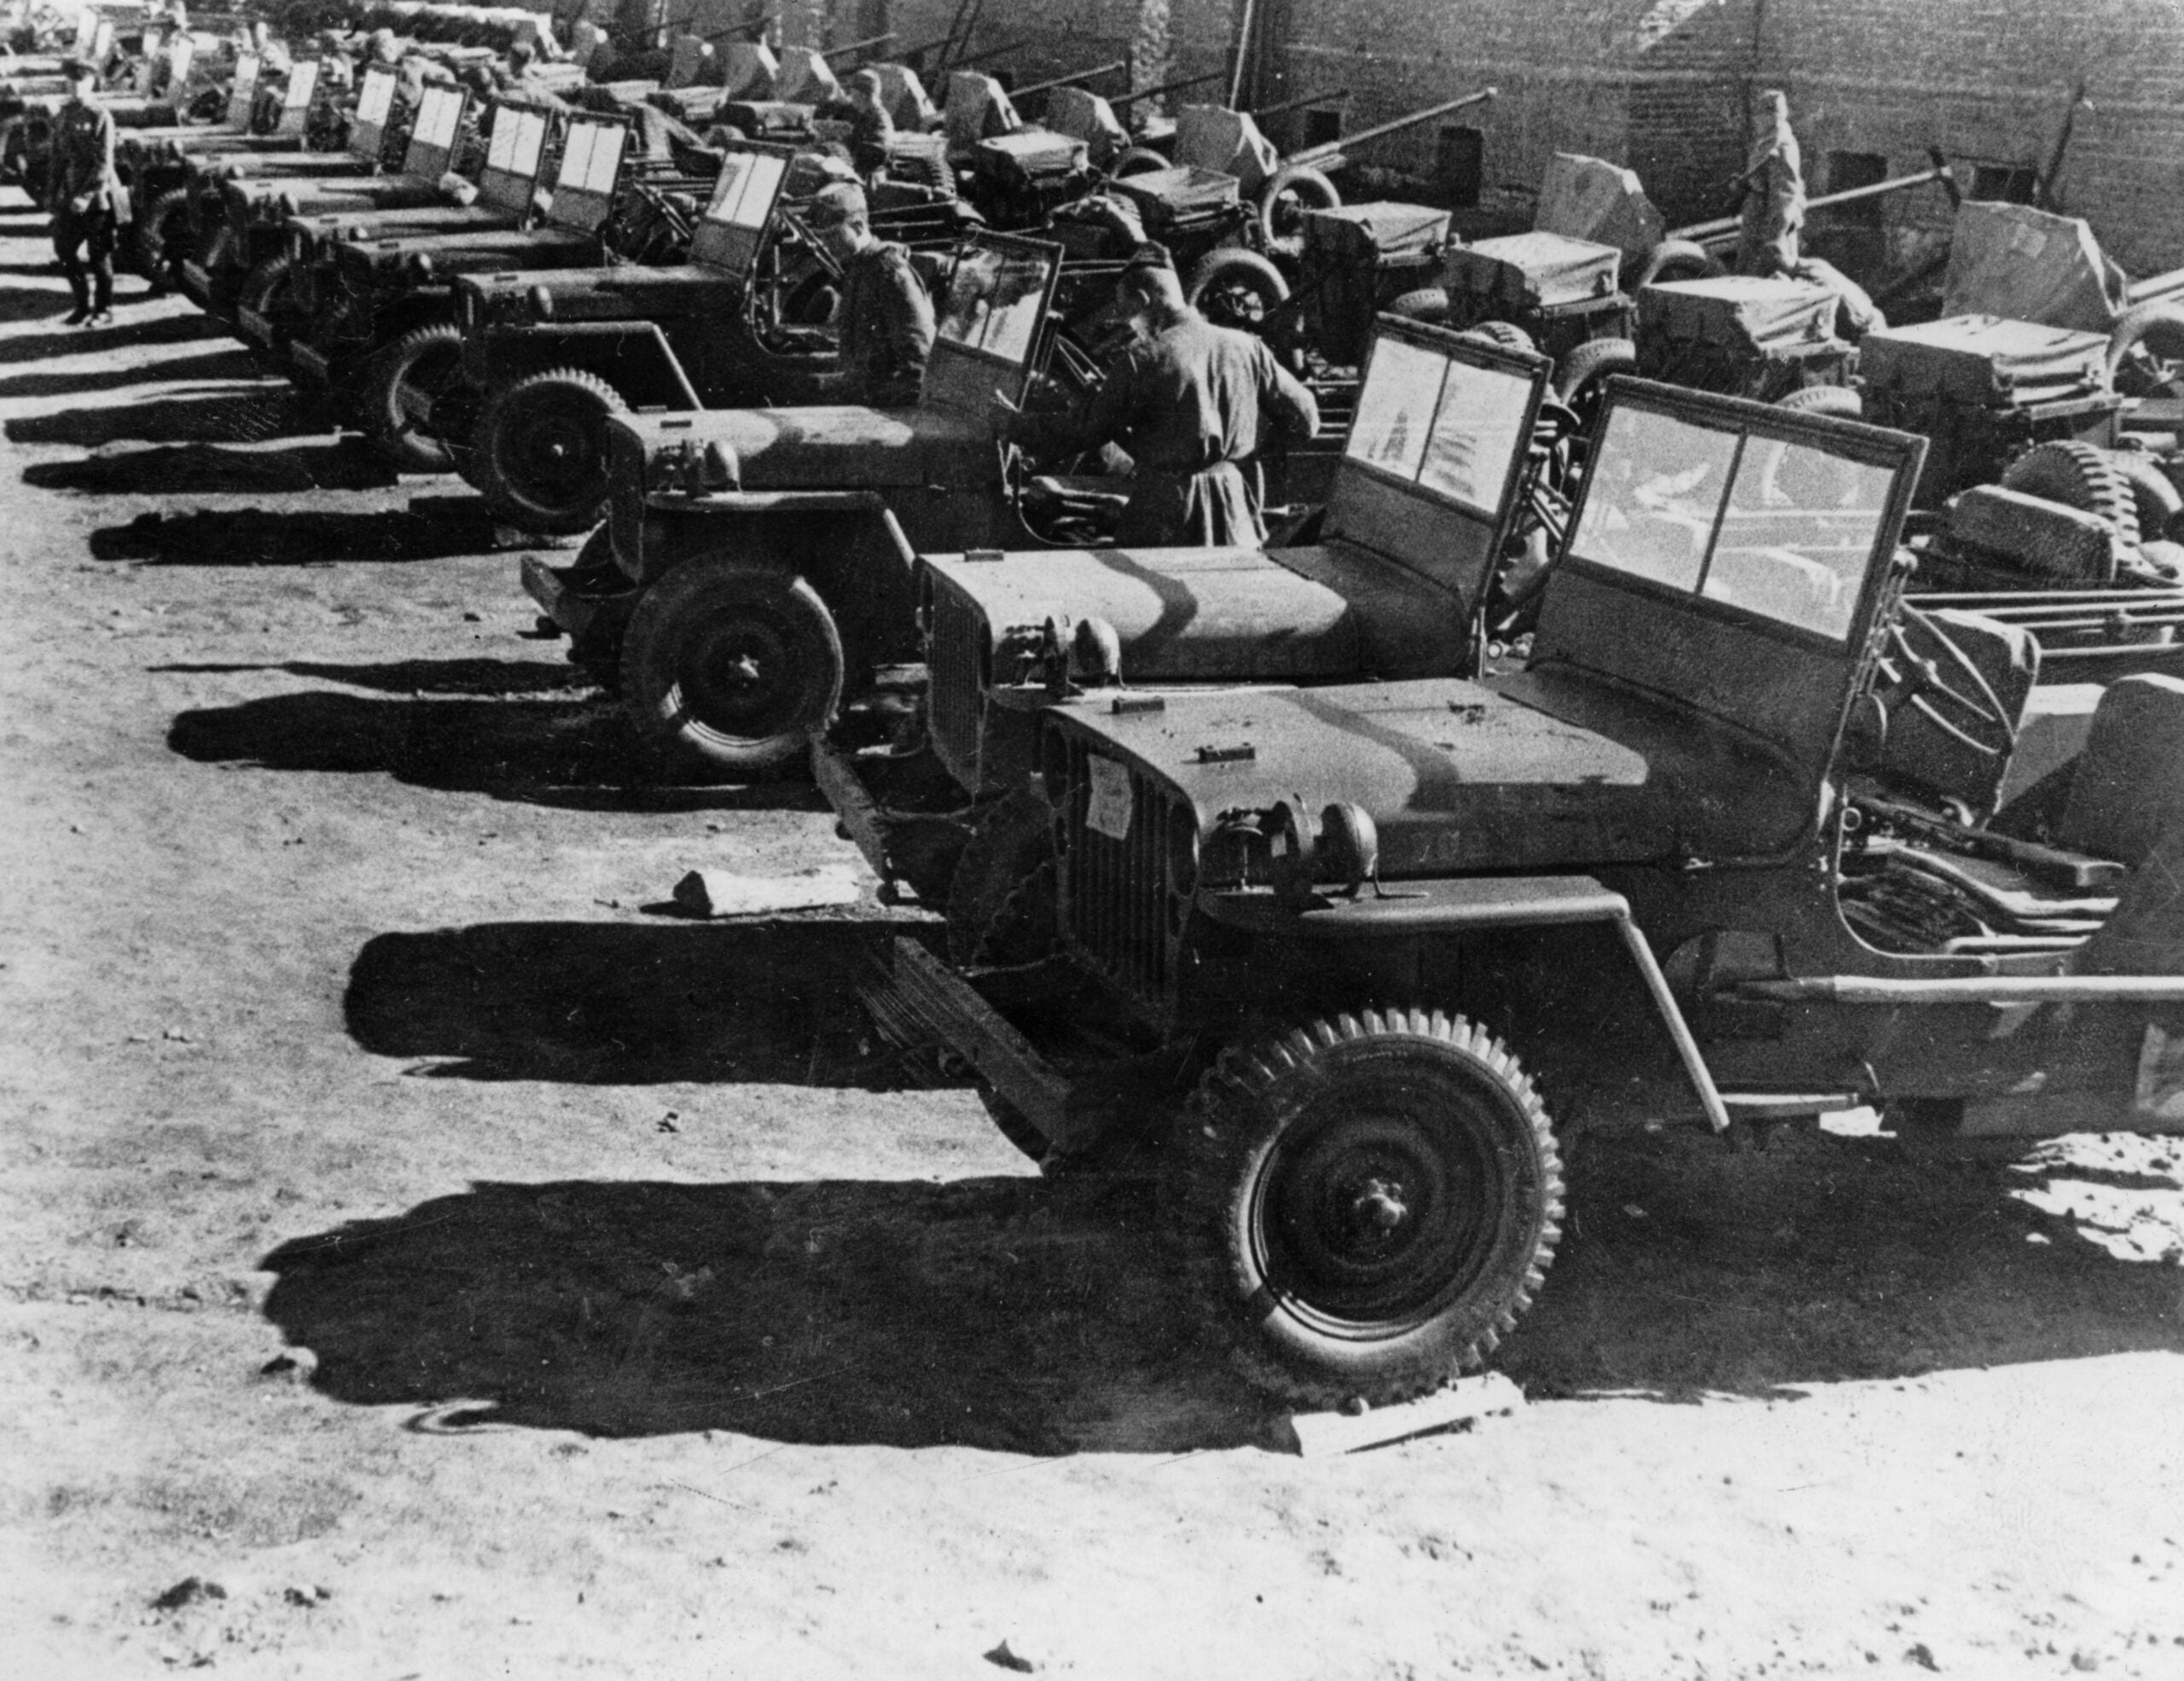 Soviet red army soldiers with us-made jeeps on the way to the front, world war 2, american aid, lend lease program. (Photo by: Sovfoto/Universal Images Group via Getty Images)